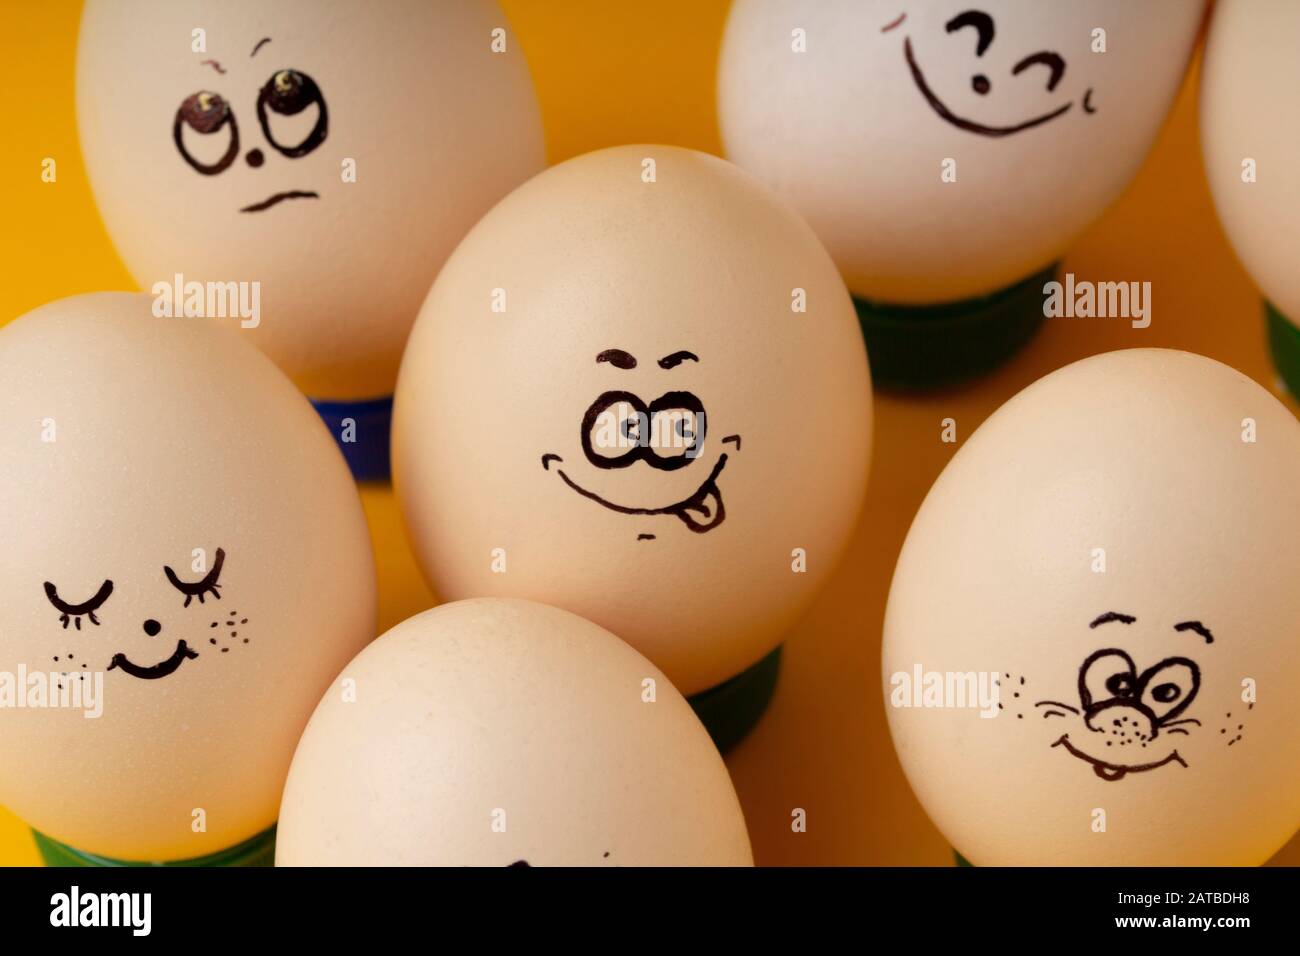 Group of chicken eggs with various emotions Stock Photo